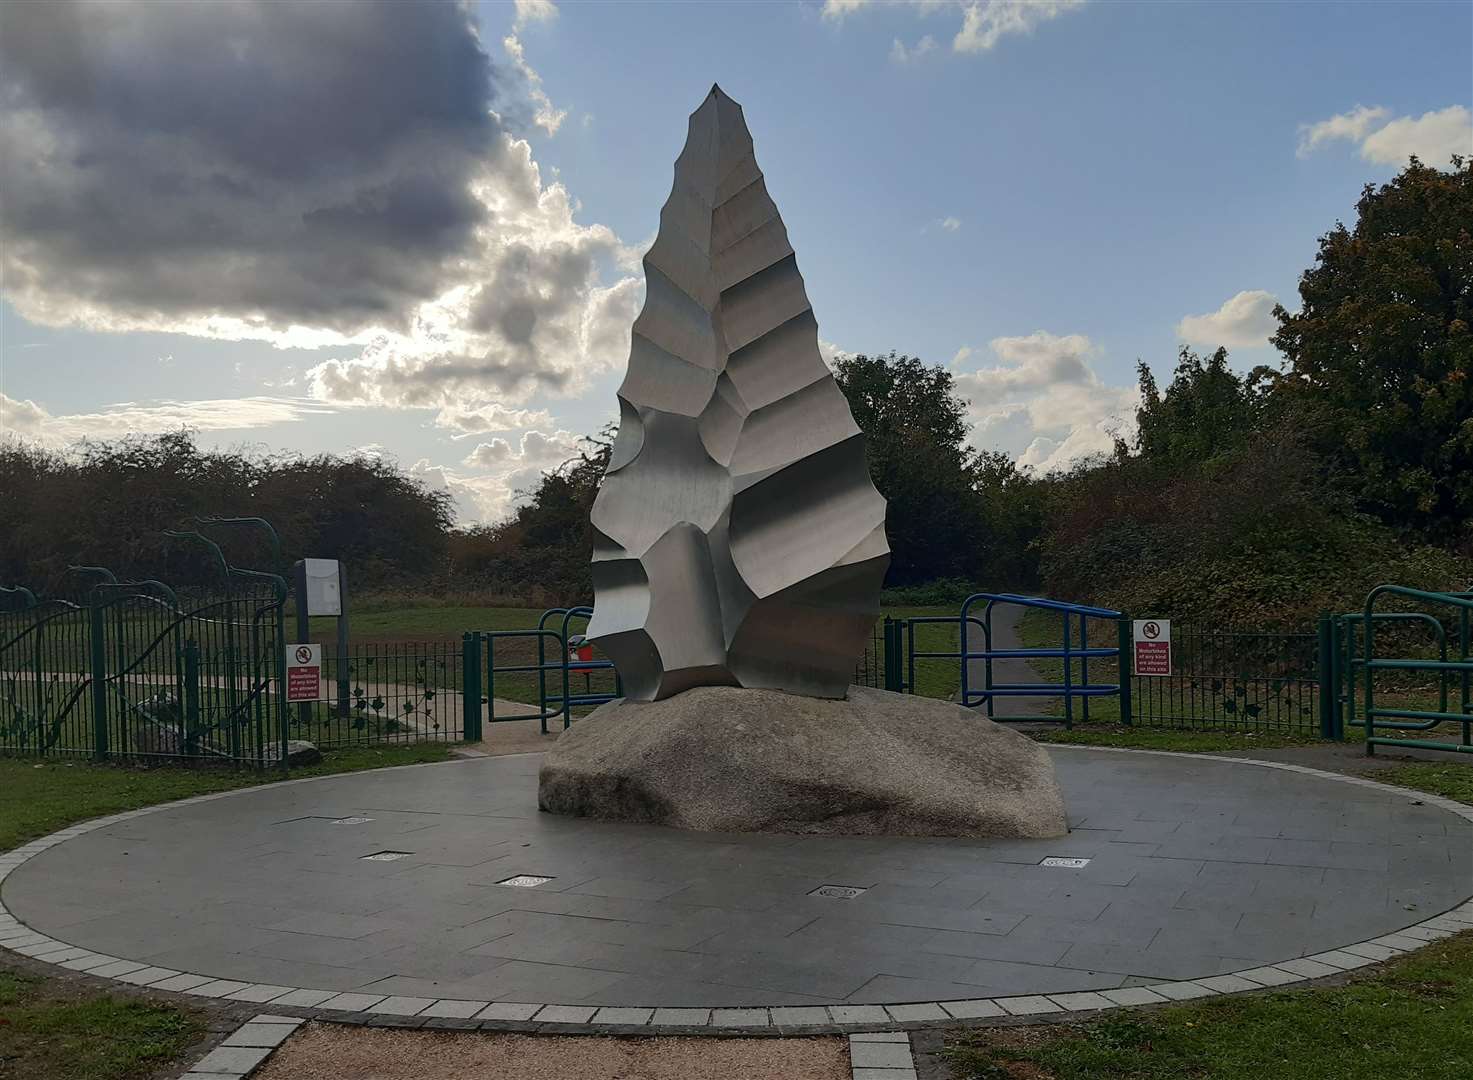 In 2004 a competition was held to design an eye catching landmark for the site, the result was this hand axe sculpture by local Dartford architects